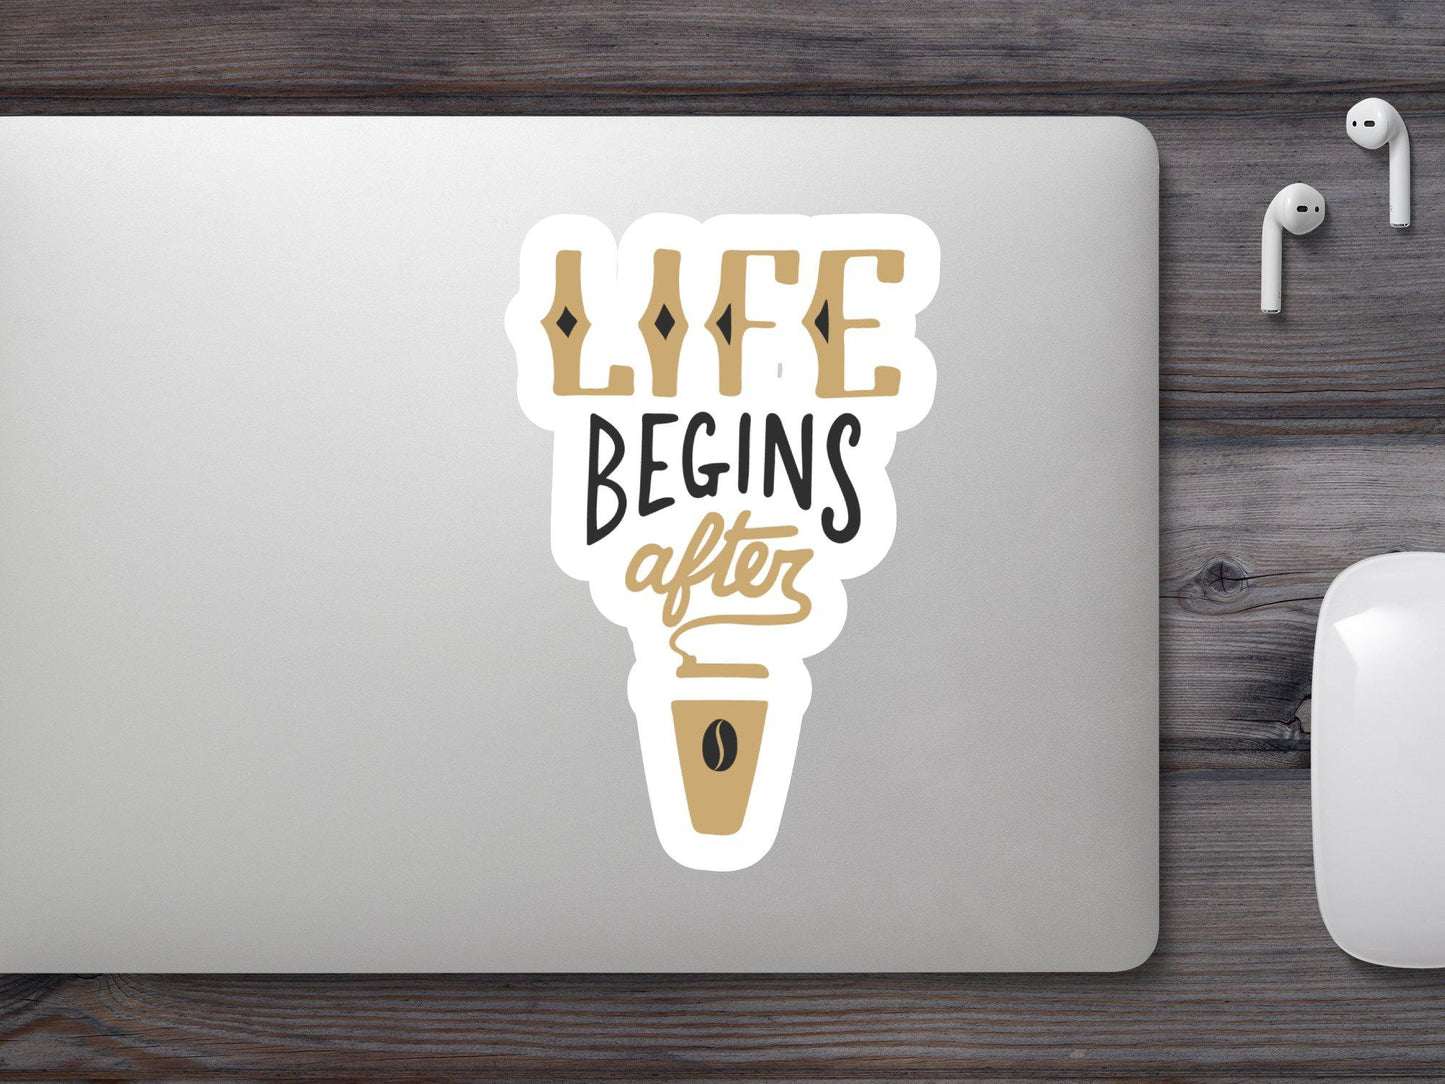 Life Begins After Coffee Sticker